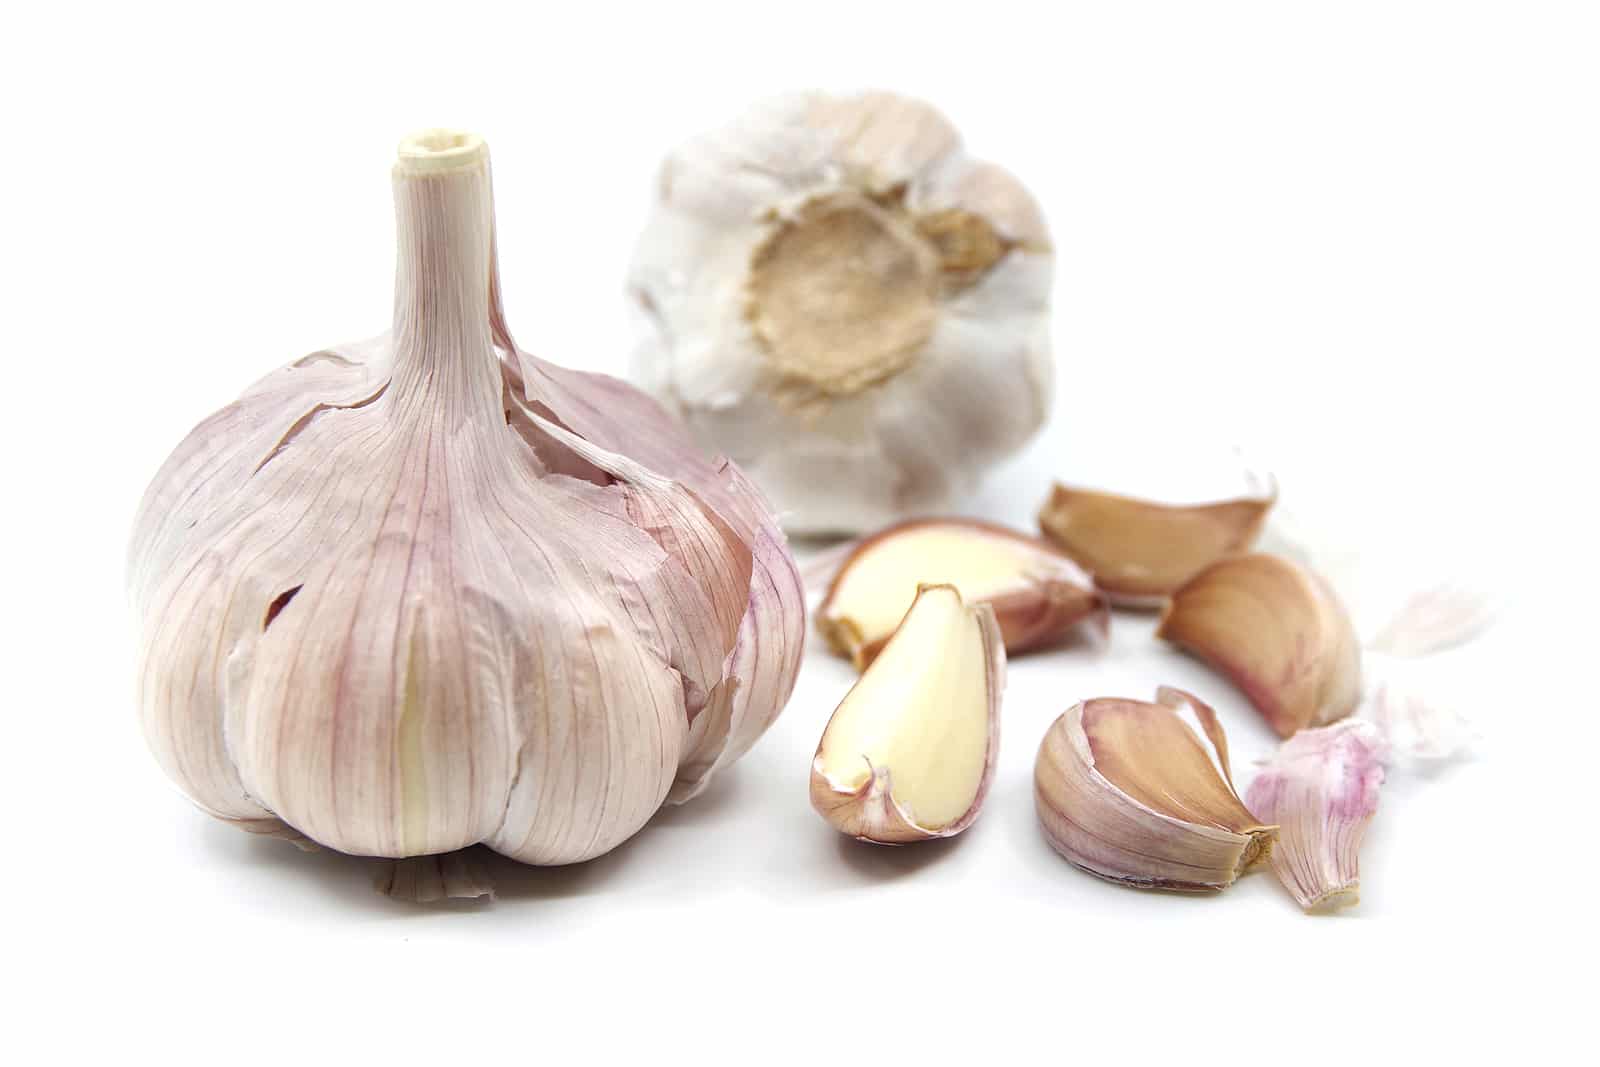 Harsh and Toxic Truths About Chinese Garlic